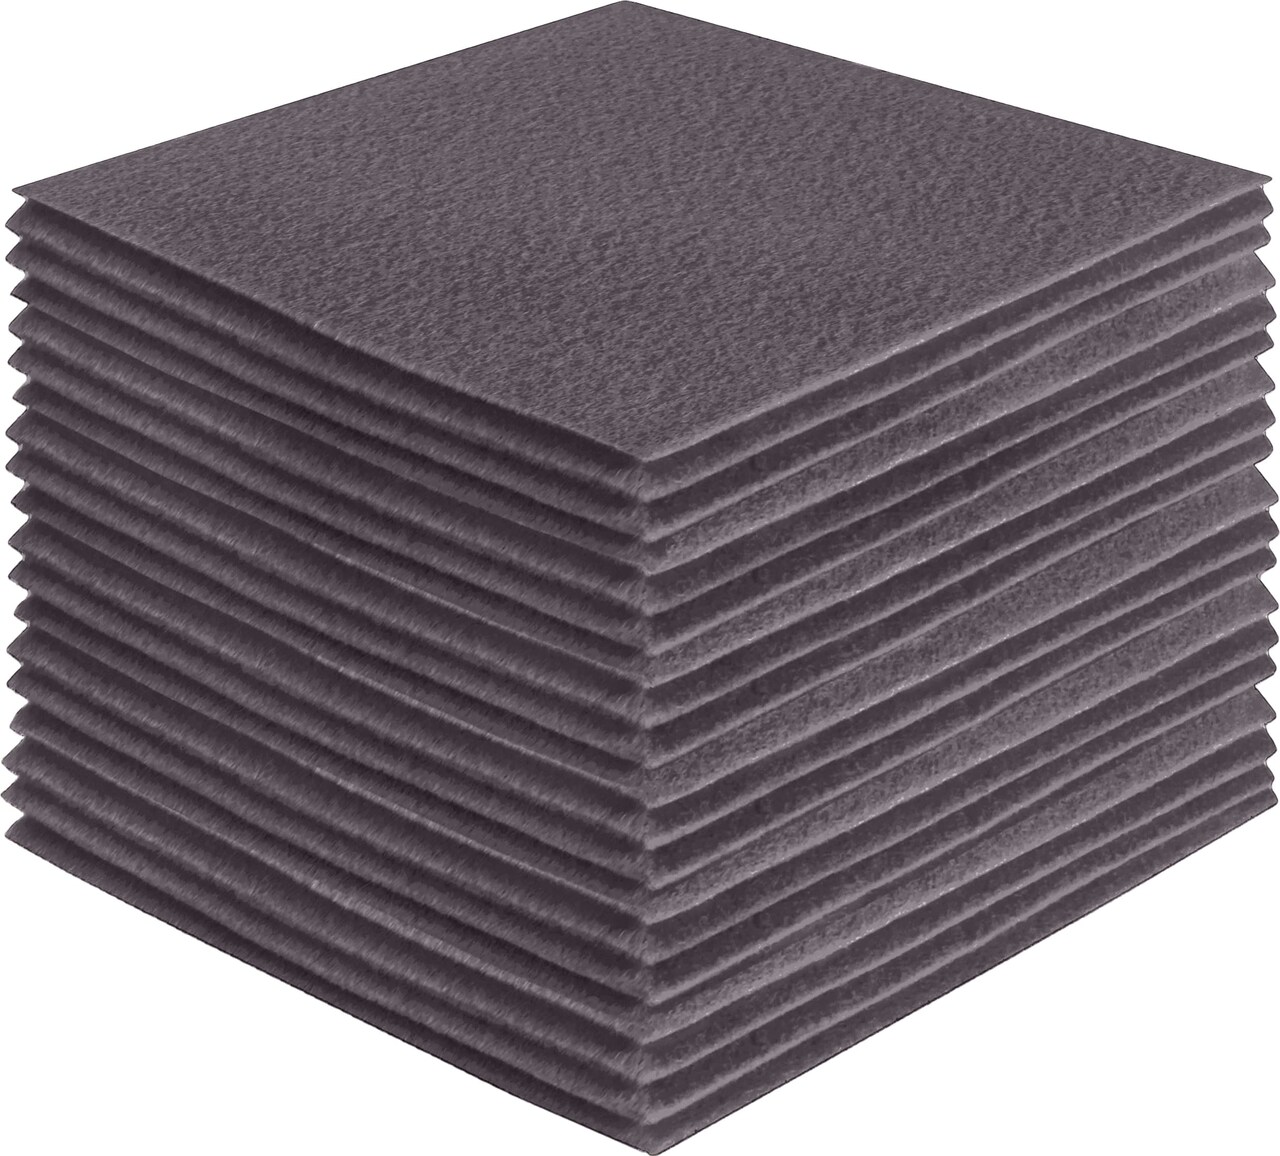 FabricLA Acrylic Felt Fabric - Pre Cut 4 X 4 Inches Felt Square Sheet  Packs - Use Felt Sheets for DIY Craft, Hobby, Costume and Decoration -  Platinum Grey A59 - 42 Pieces